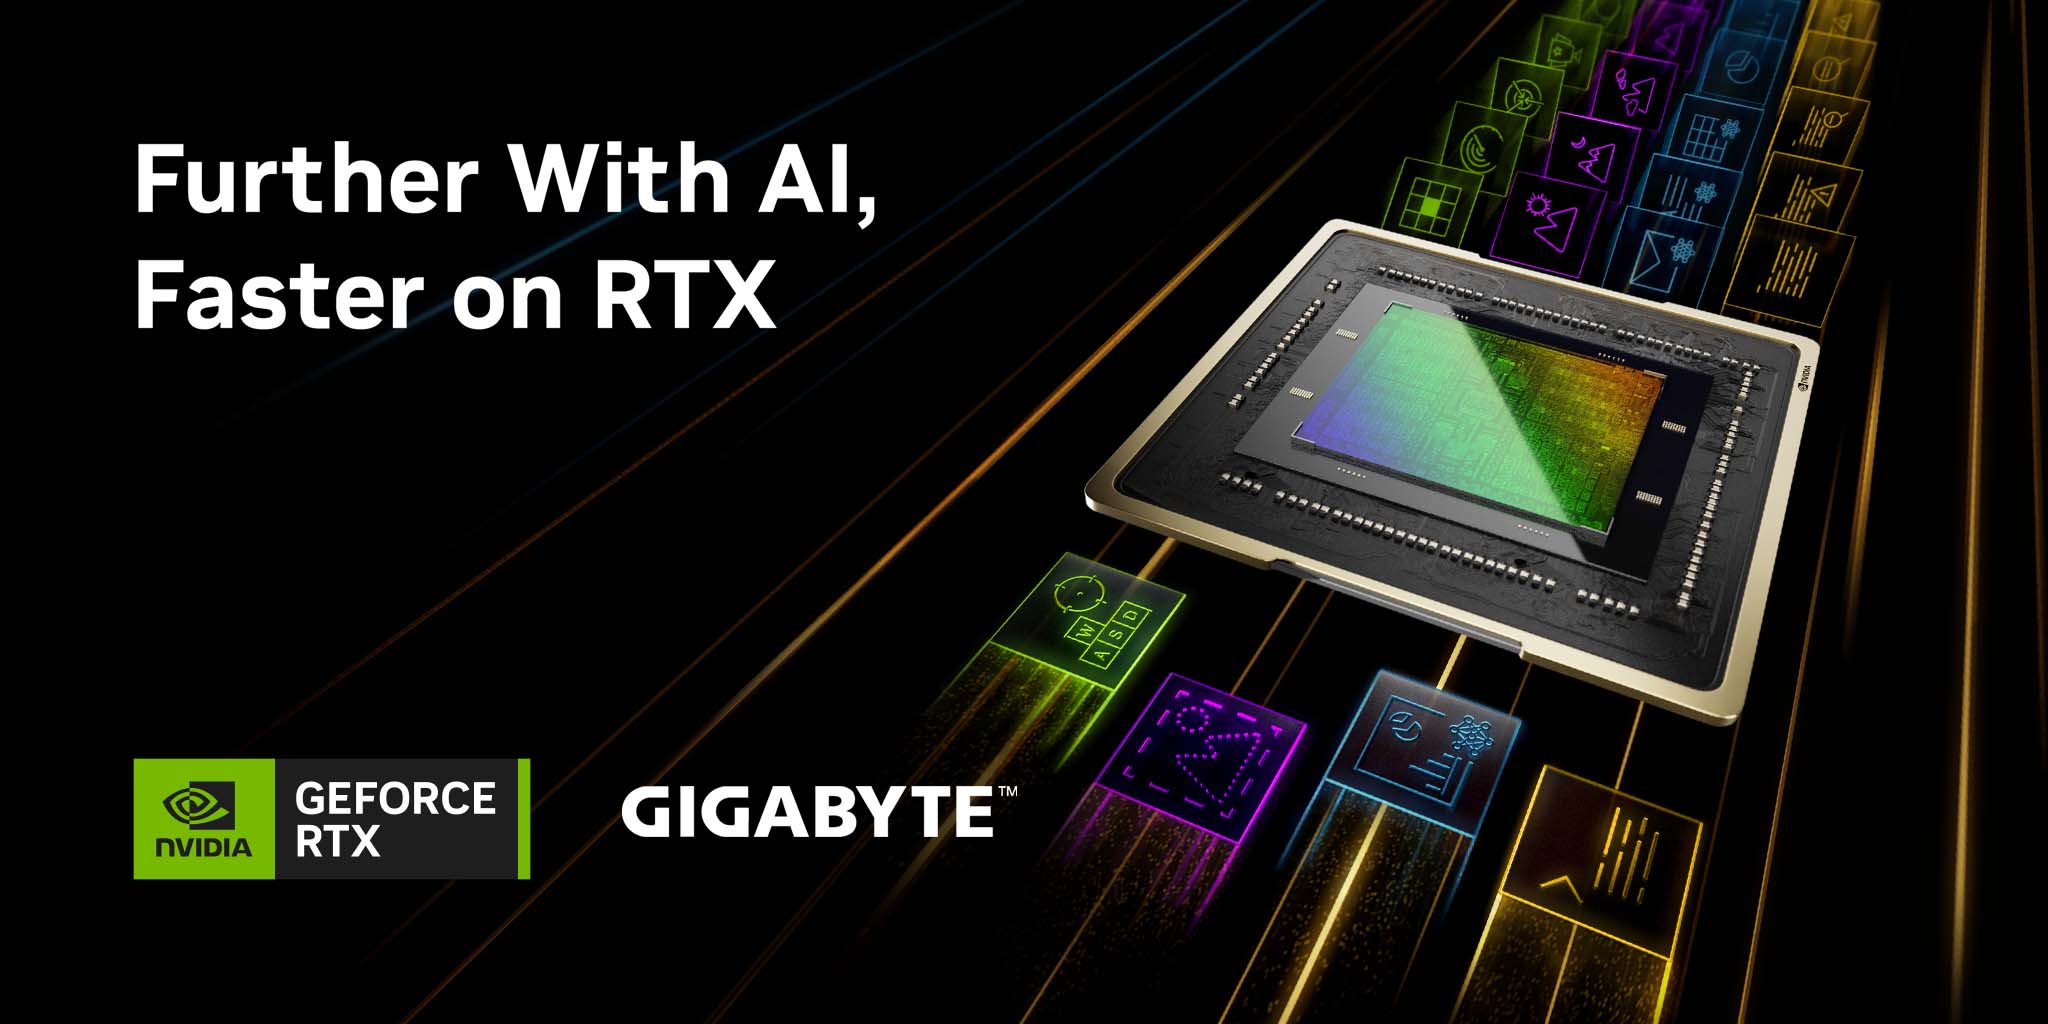 [PH] FURTHER WITH AI, FASTER ON RTX.